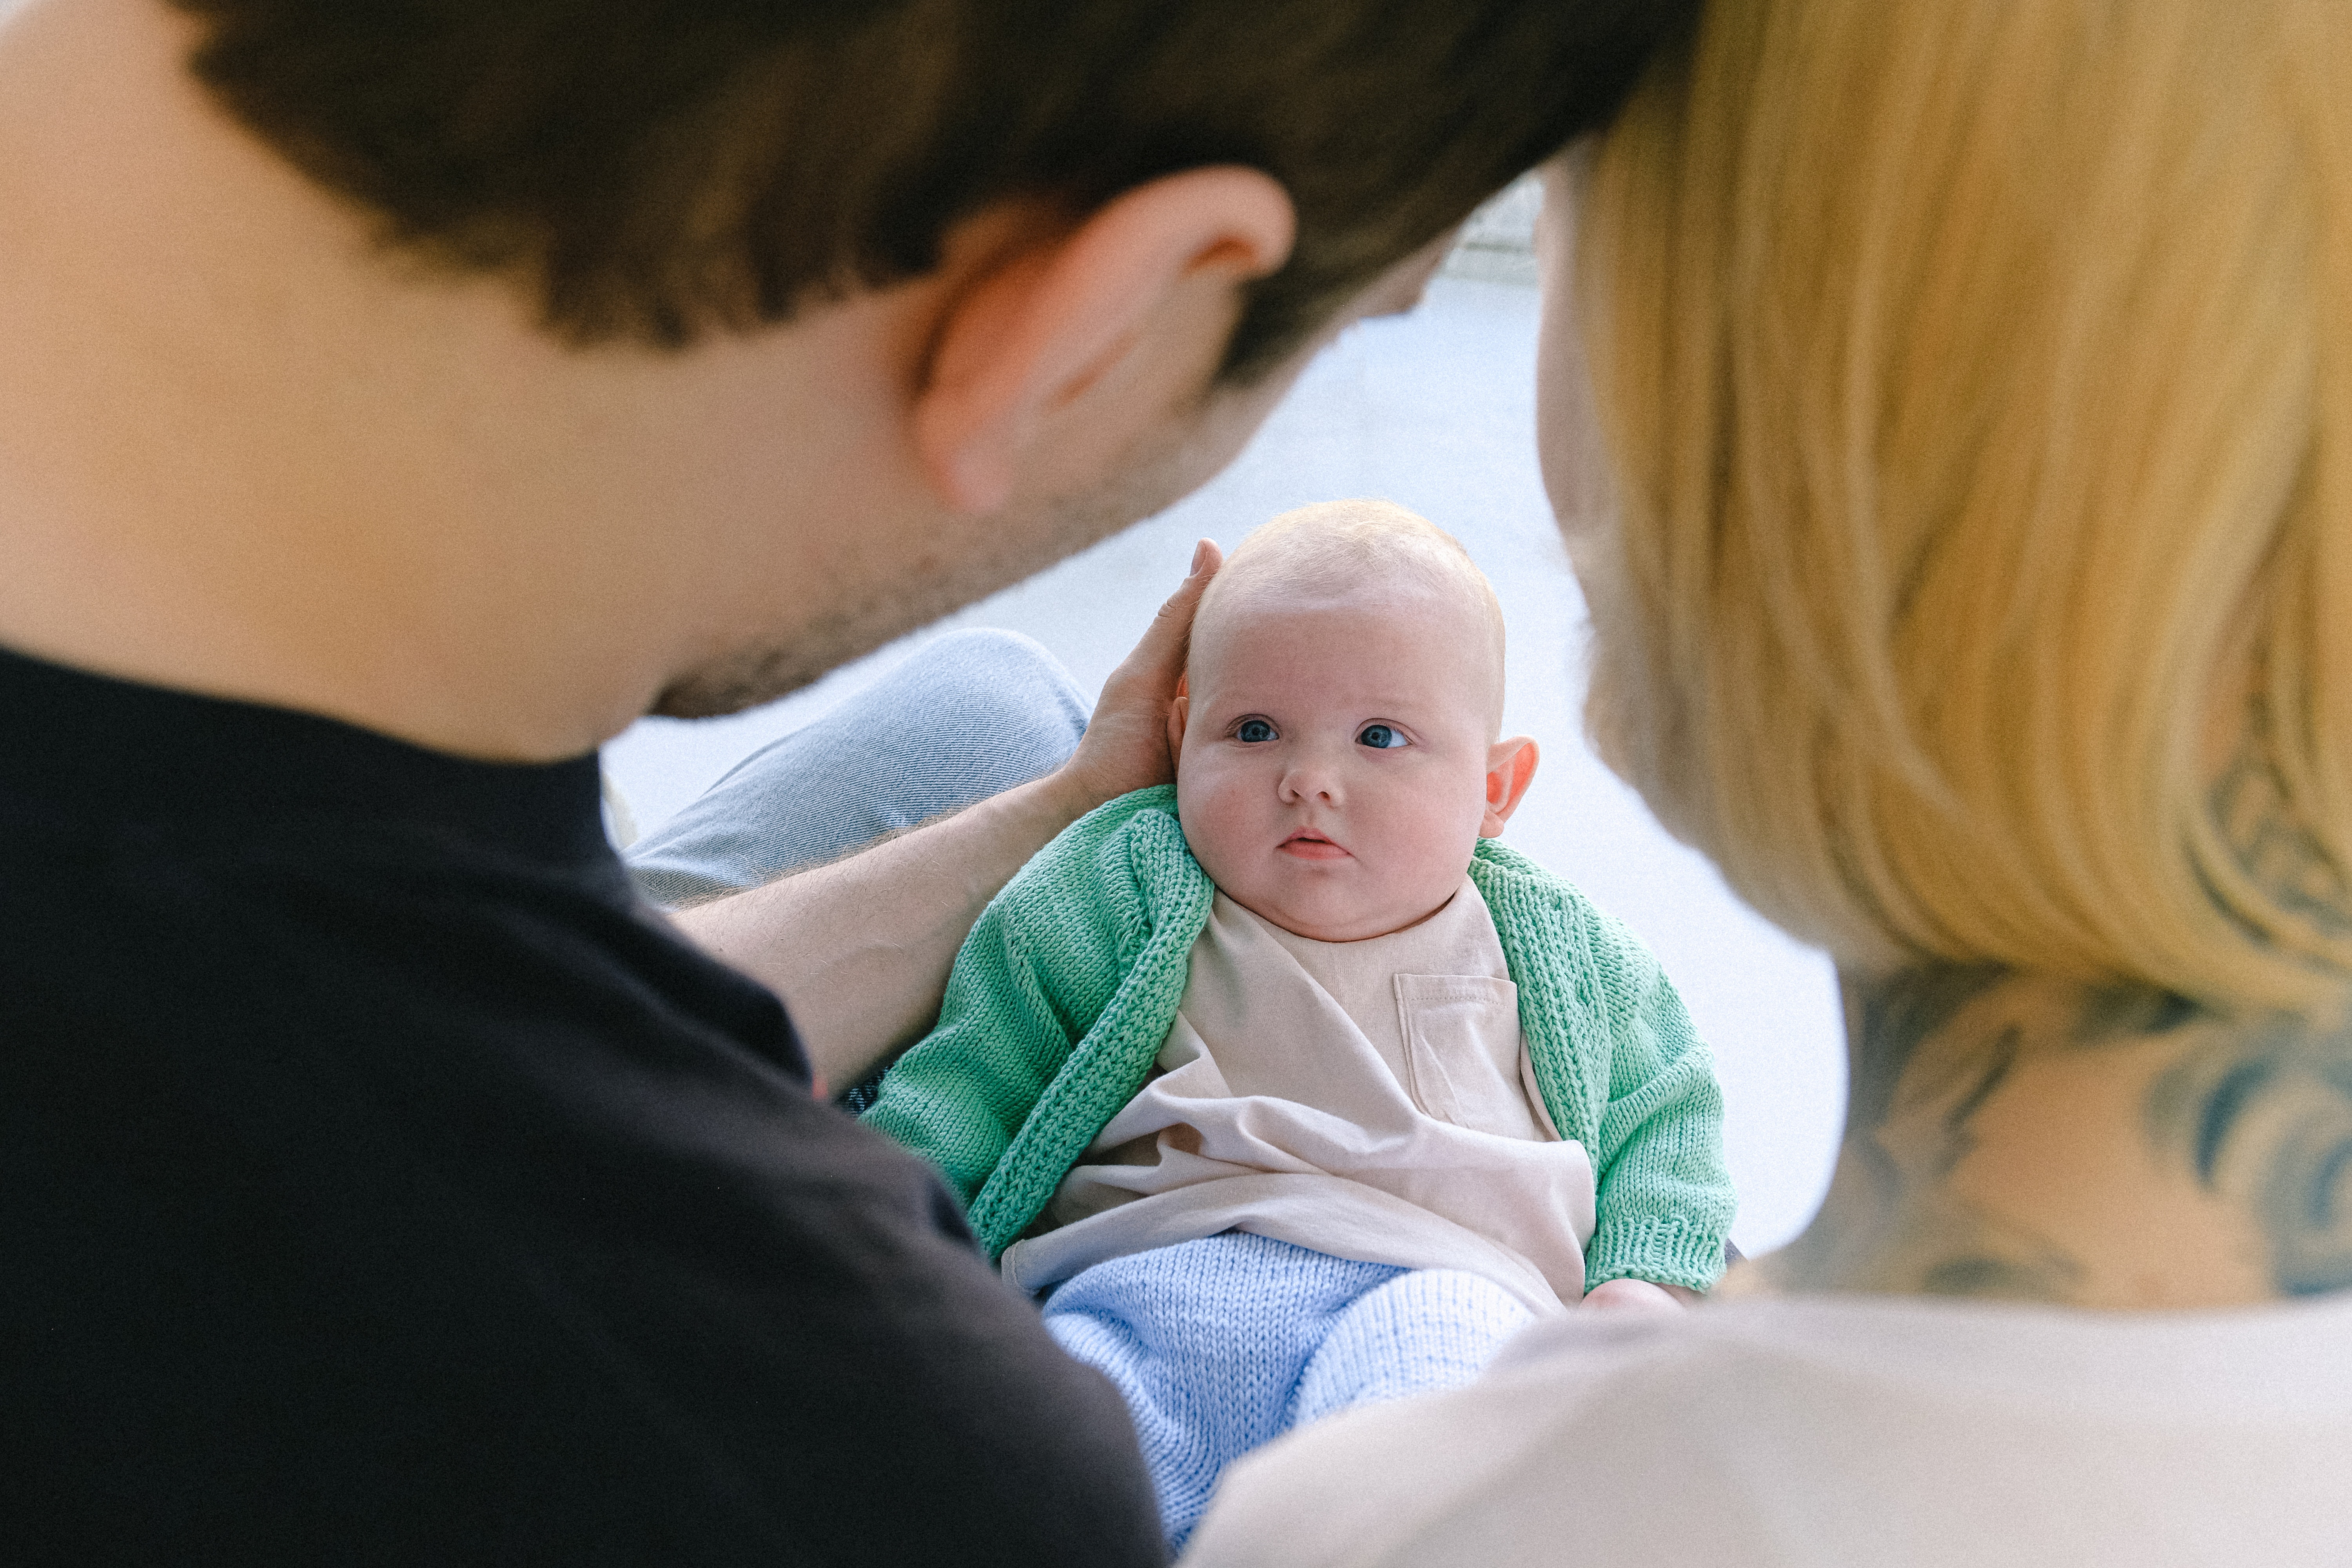 Couple looking at a baby | Source: Pexels